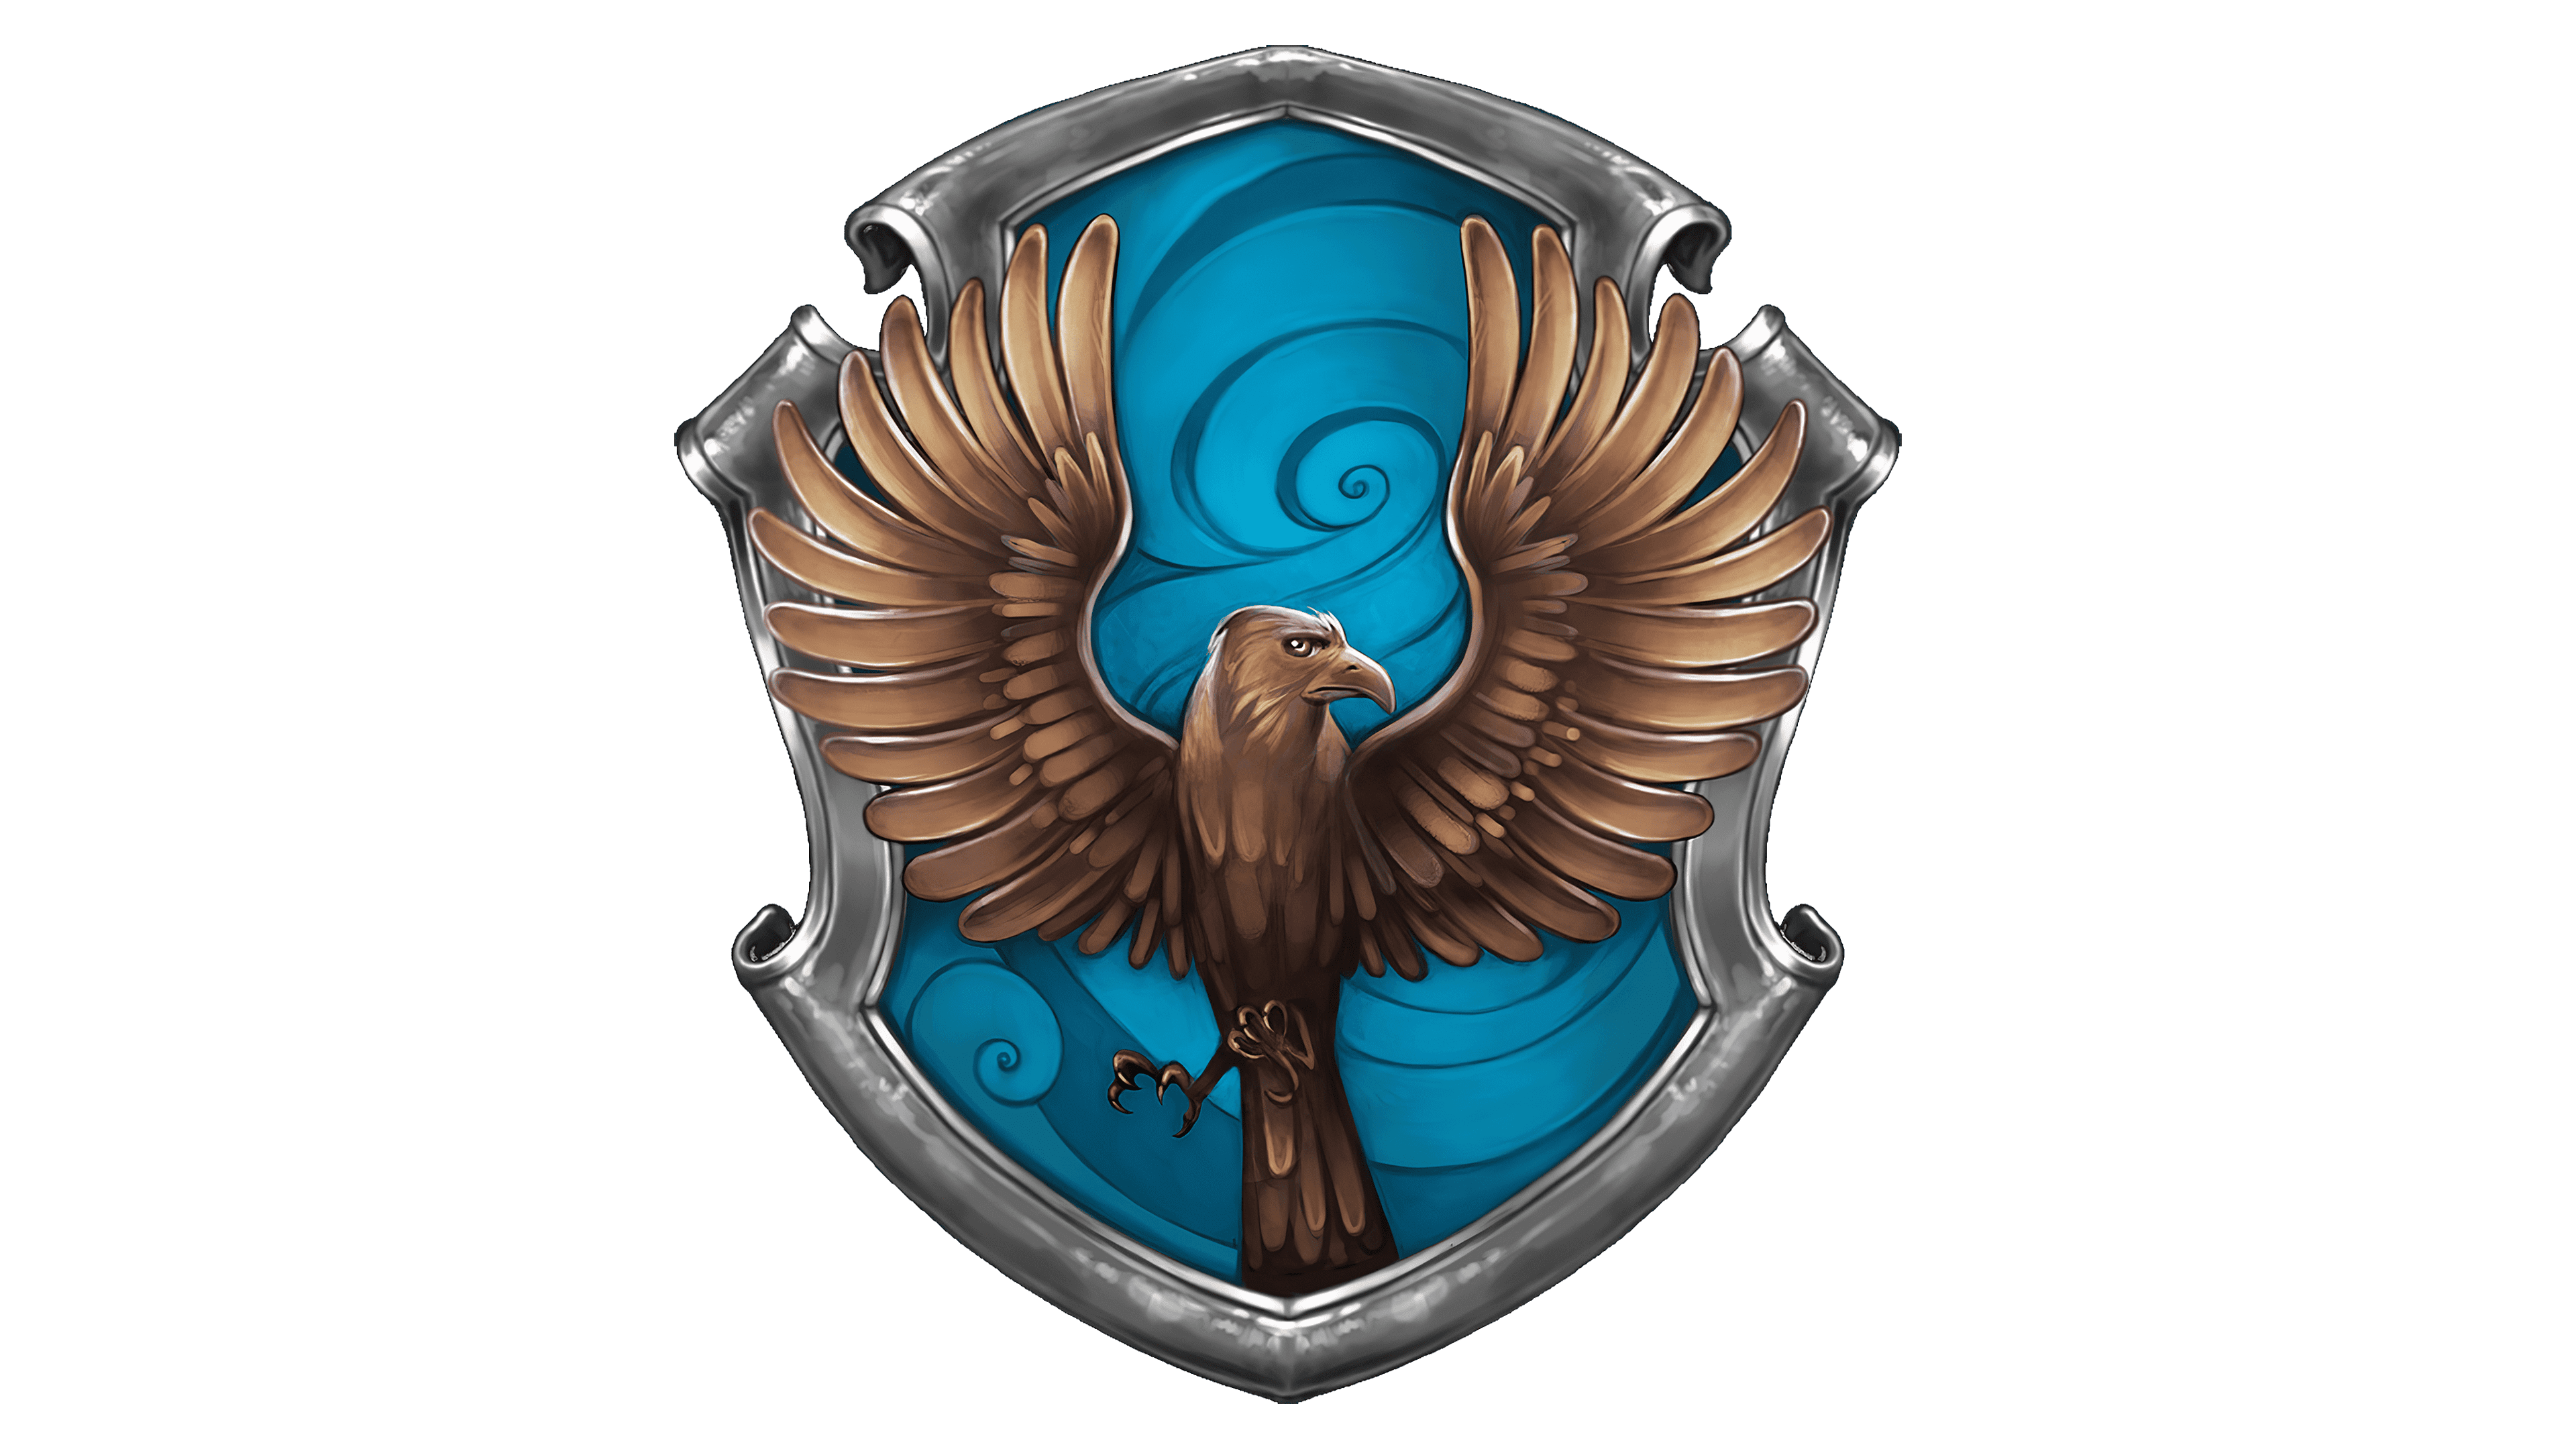 Why Is Ravenclaw's Mascot an Eagle?